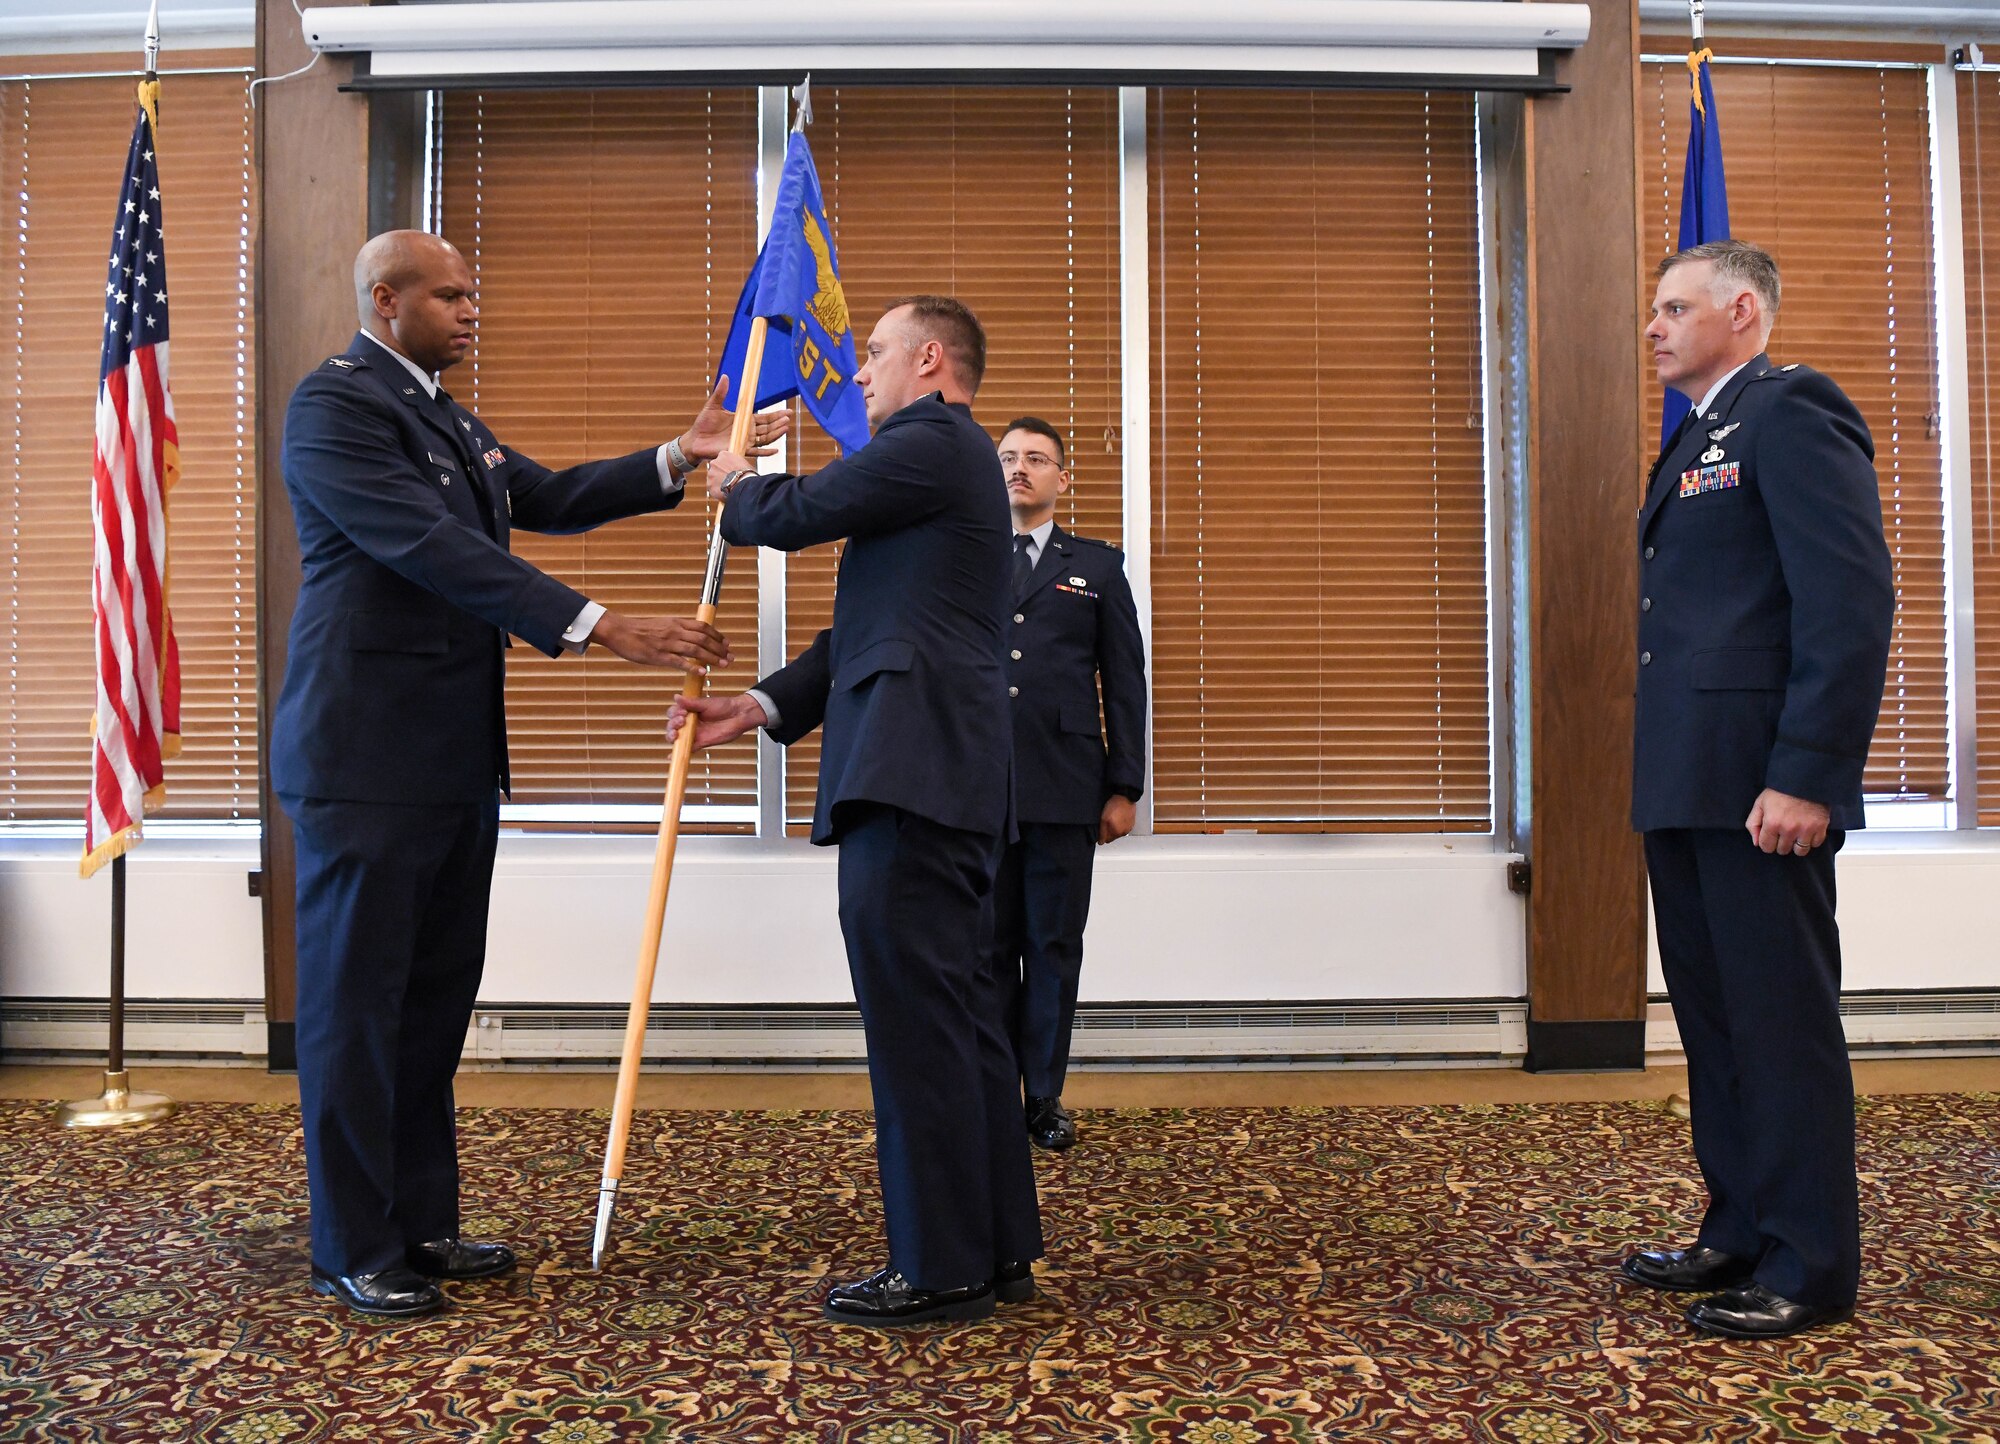 Col. Lincoln Bonner, left, chief of the Arnold Engineering Development Complex Test Division, passes the guidon to incoming Space Test Branch chief, Lt. Col. Dayvid Prahl, after leadership of the Branch was relinquished by Lt. Col. Adam Quick, right, during a Change of Leadership ceremony June 24, 2021, at Arnold Lakeside Complex at Arnold Air Force Base, Tenn. (U.S. Air Force photo by Jill Pickett)